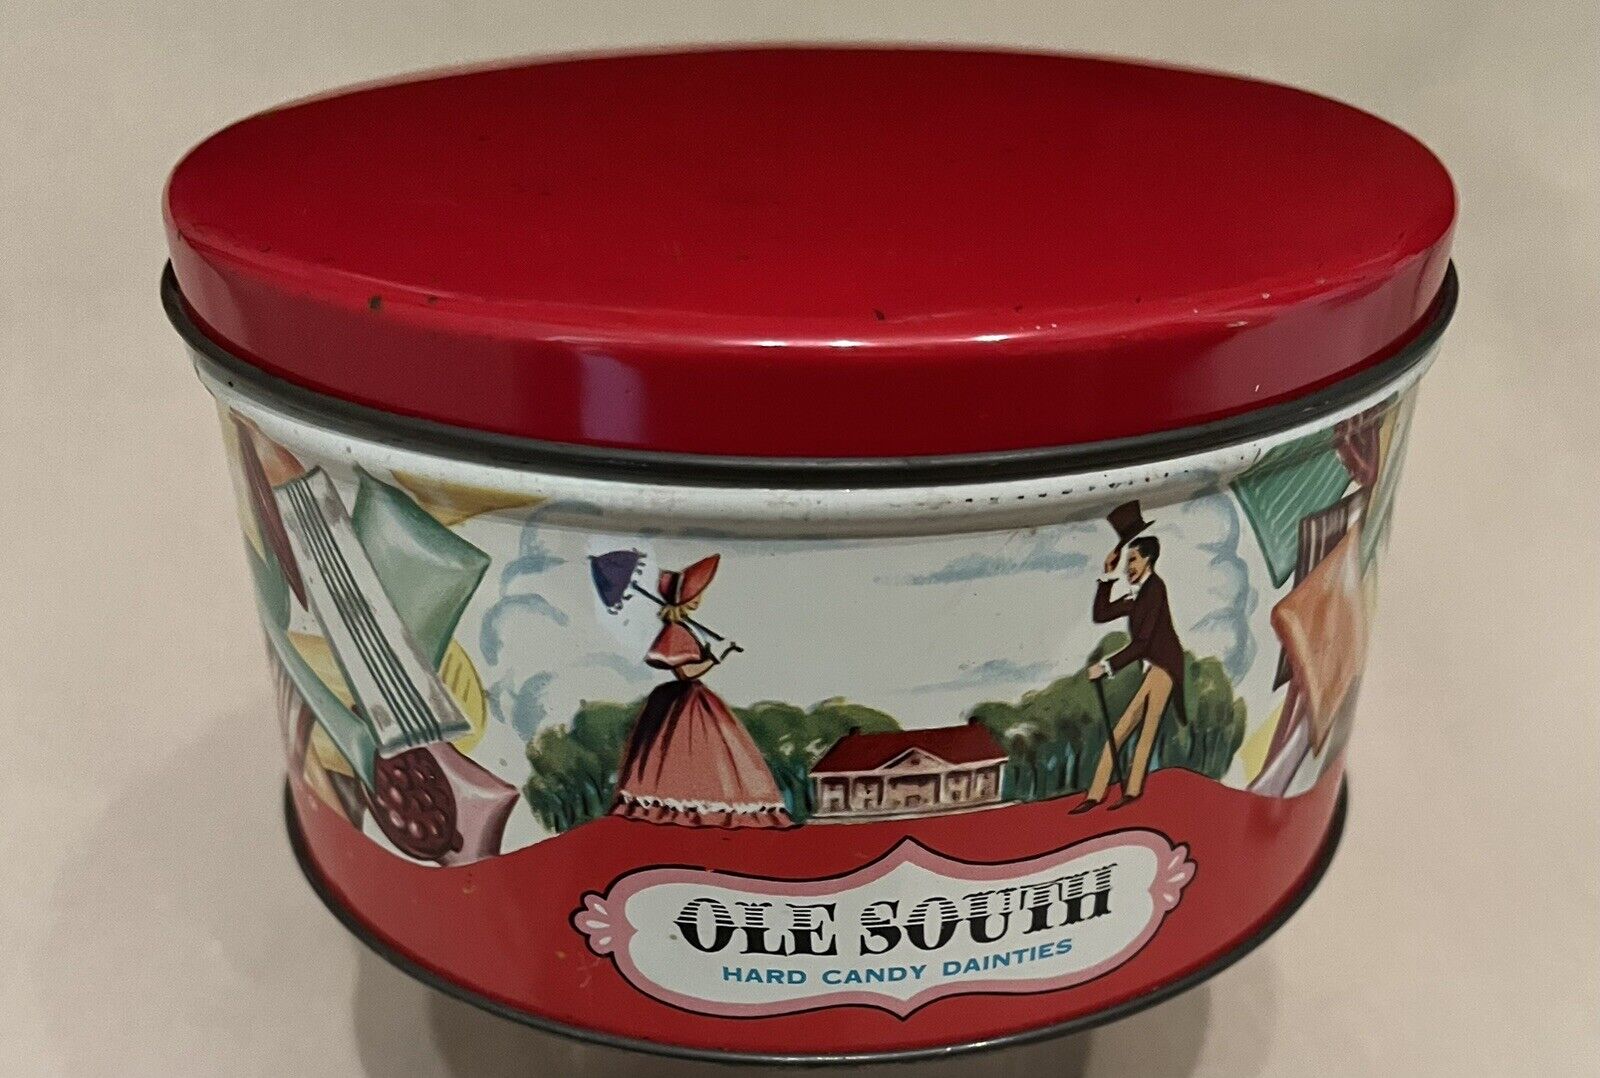 Vintage Old South Hard Candy Tin The Confectionery Div of Ludens Inc Reading PA